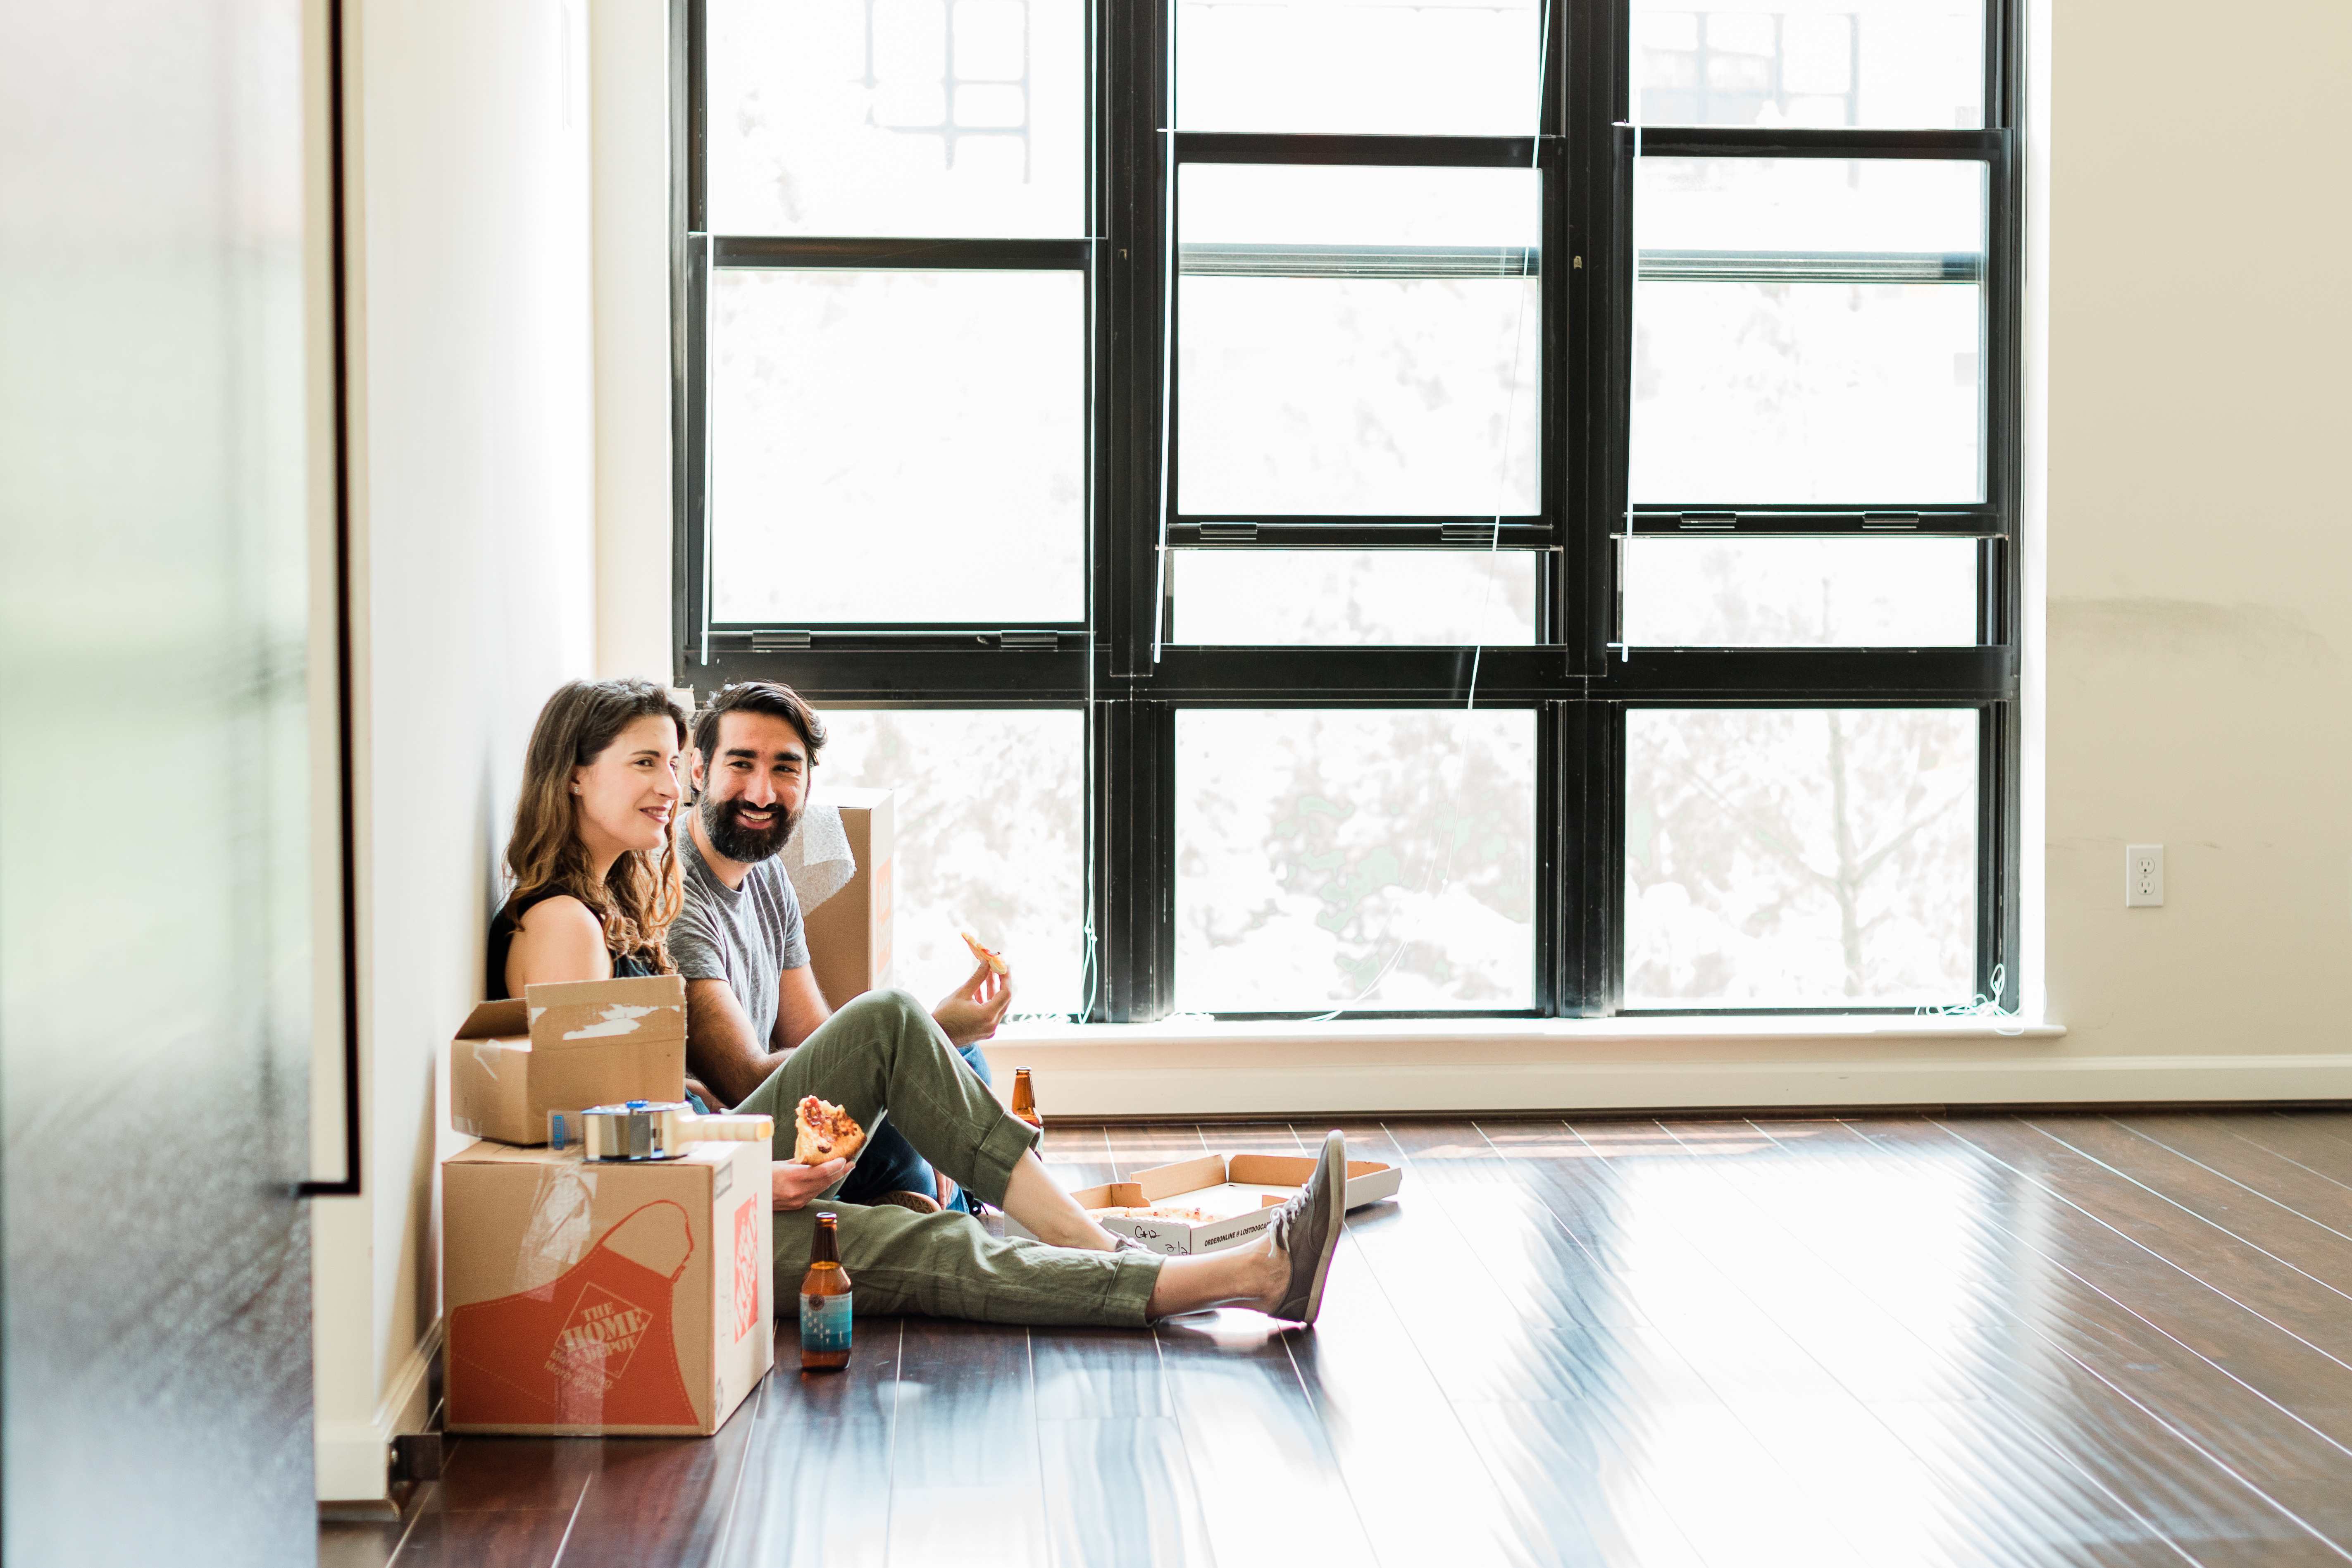 A young couple sits on the floor of their empty apartment surrounded by a few boxes. They are eating pizza, drinking beer, and laughing.